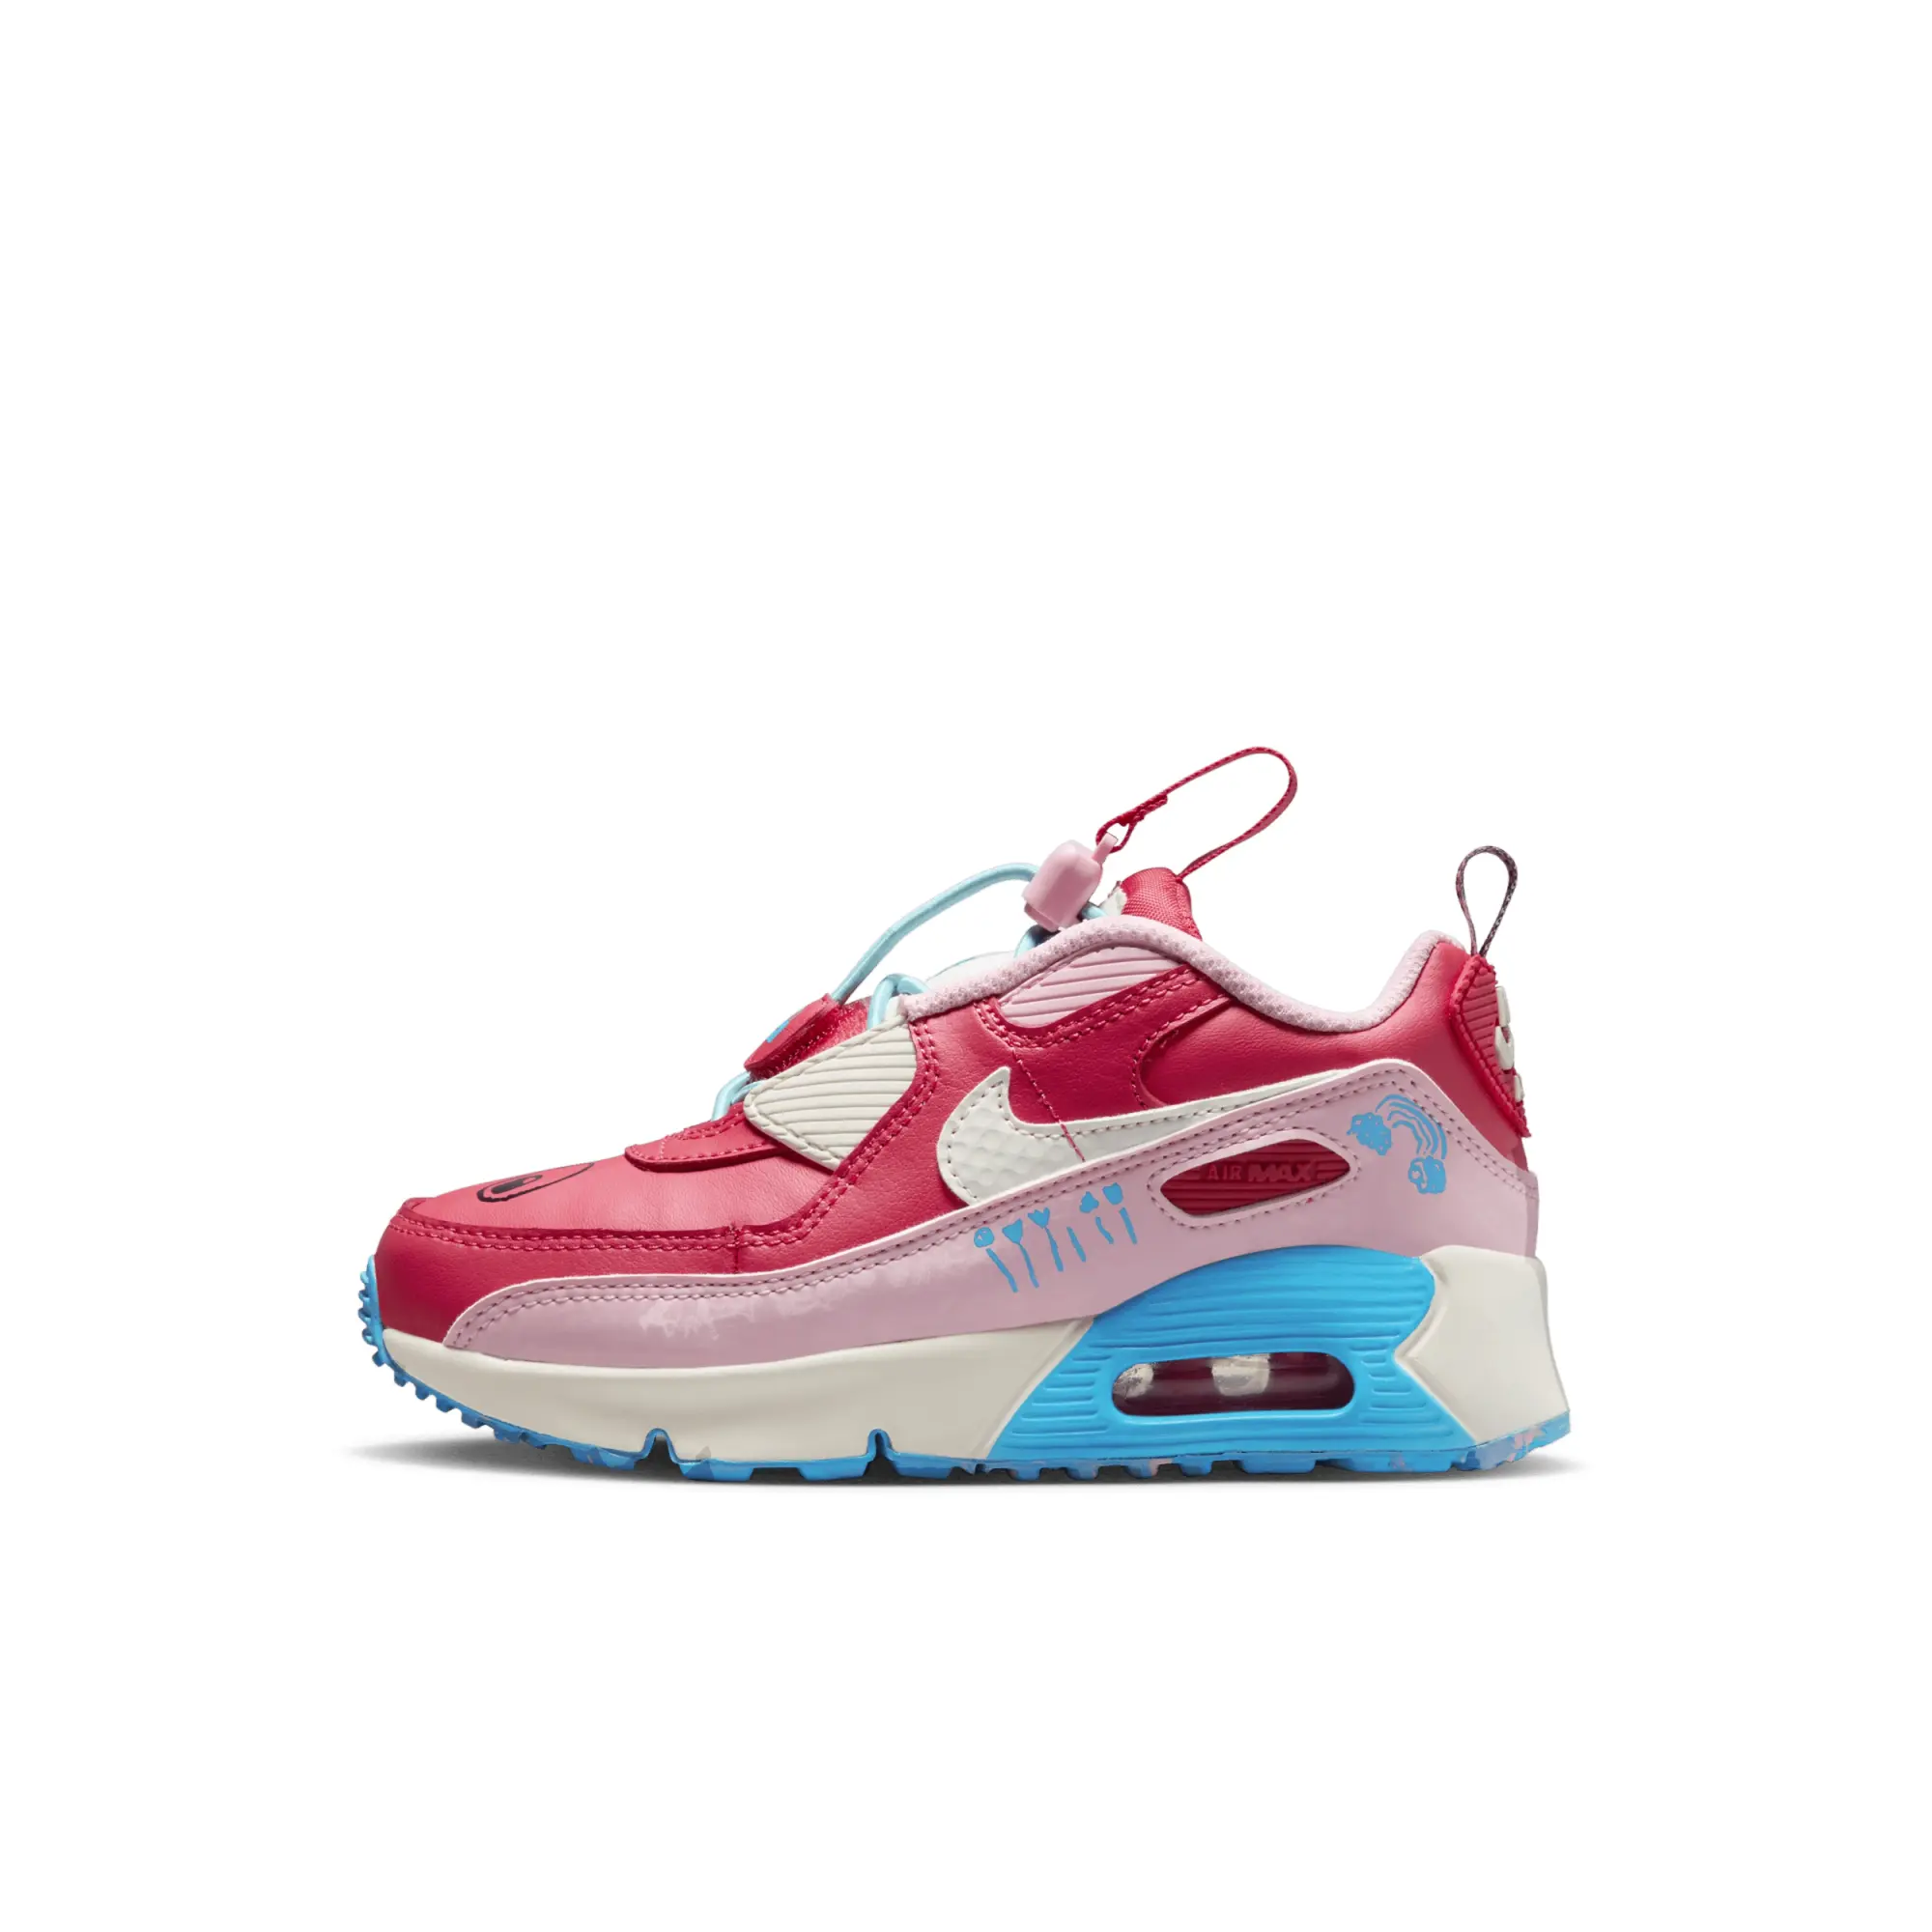 Nike Air Max 90 Toggle SE Younger Kids' Shoes - Red